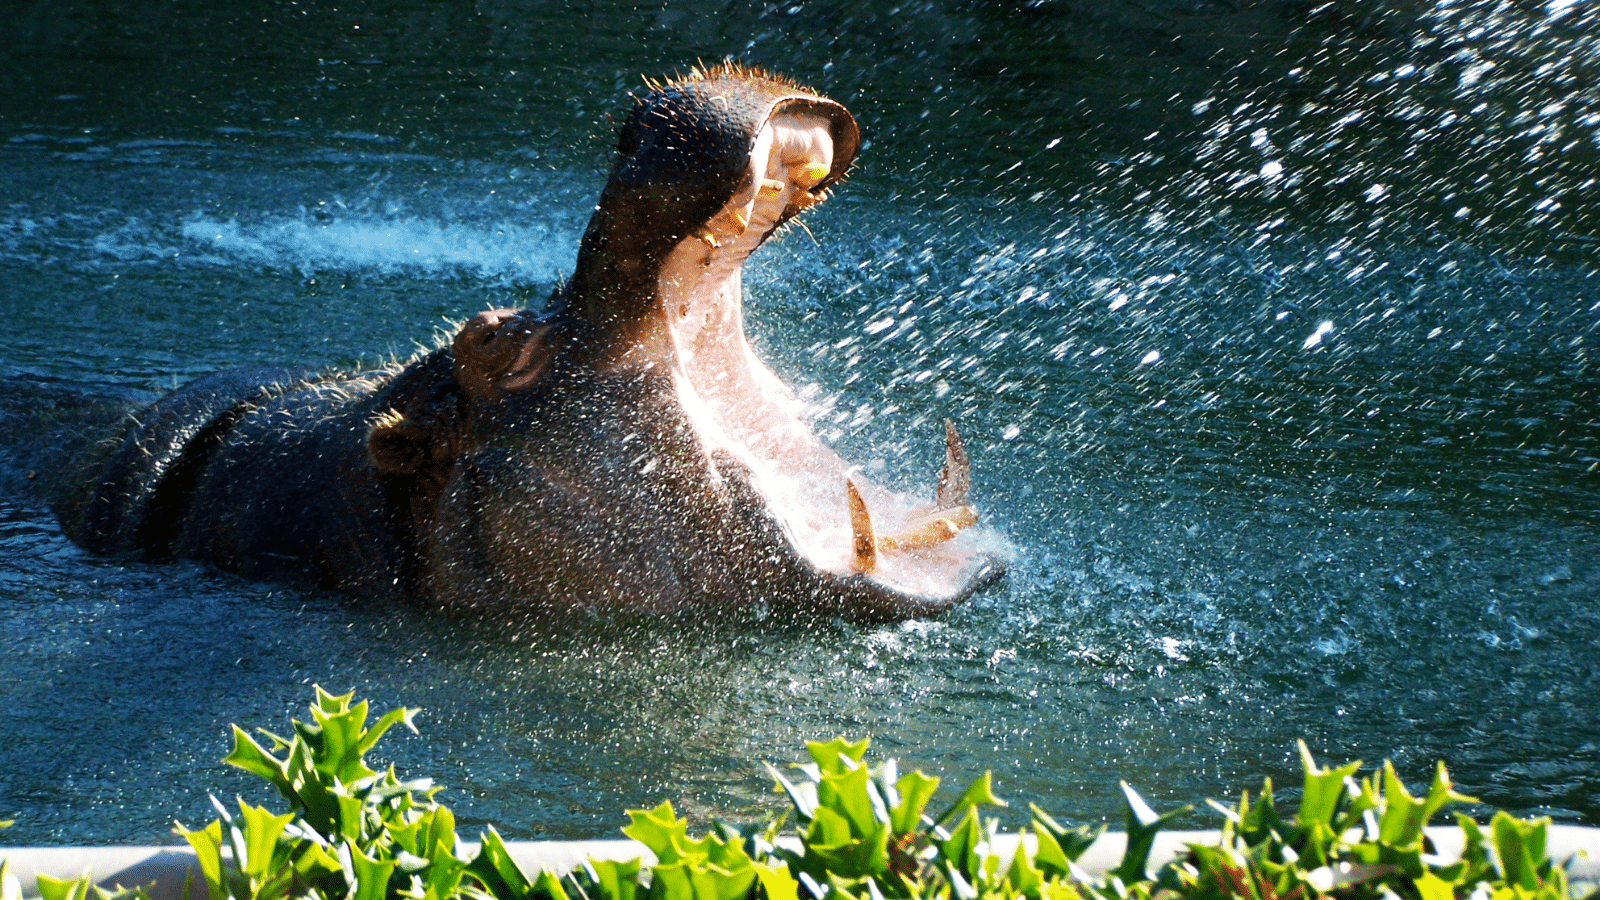 Hippopotamus in the water, with it's mouth open wide, spitting out water.